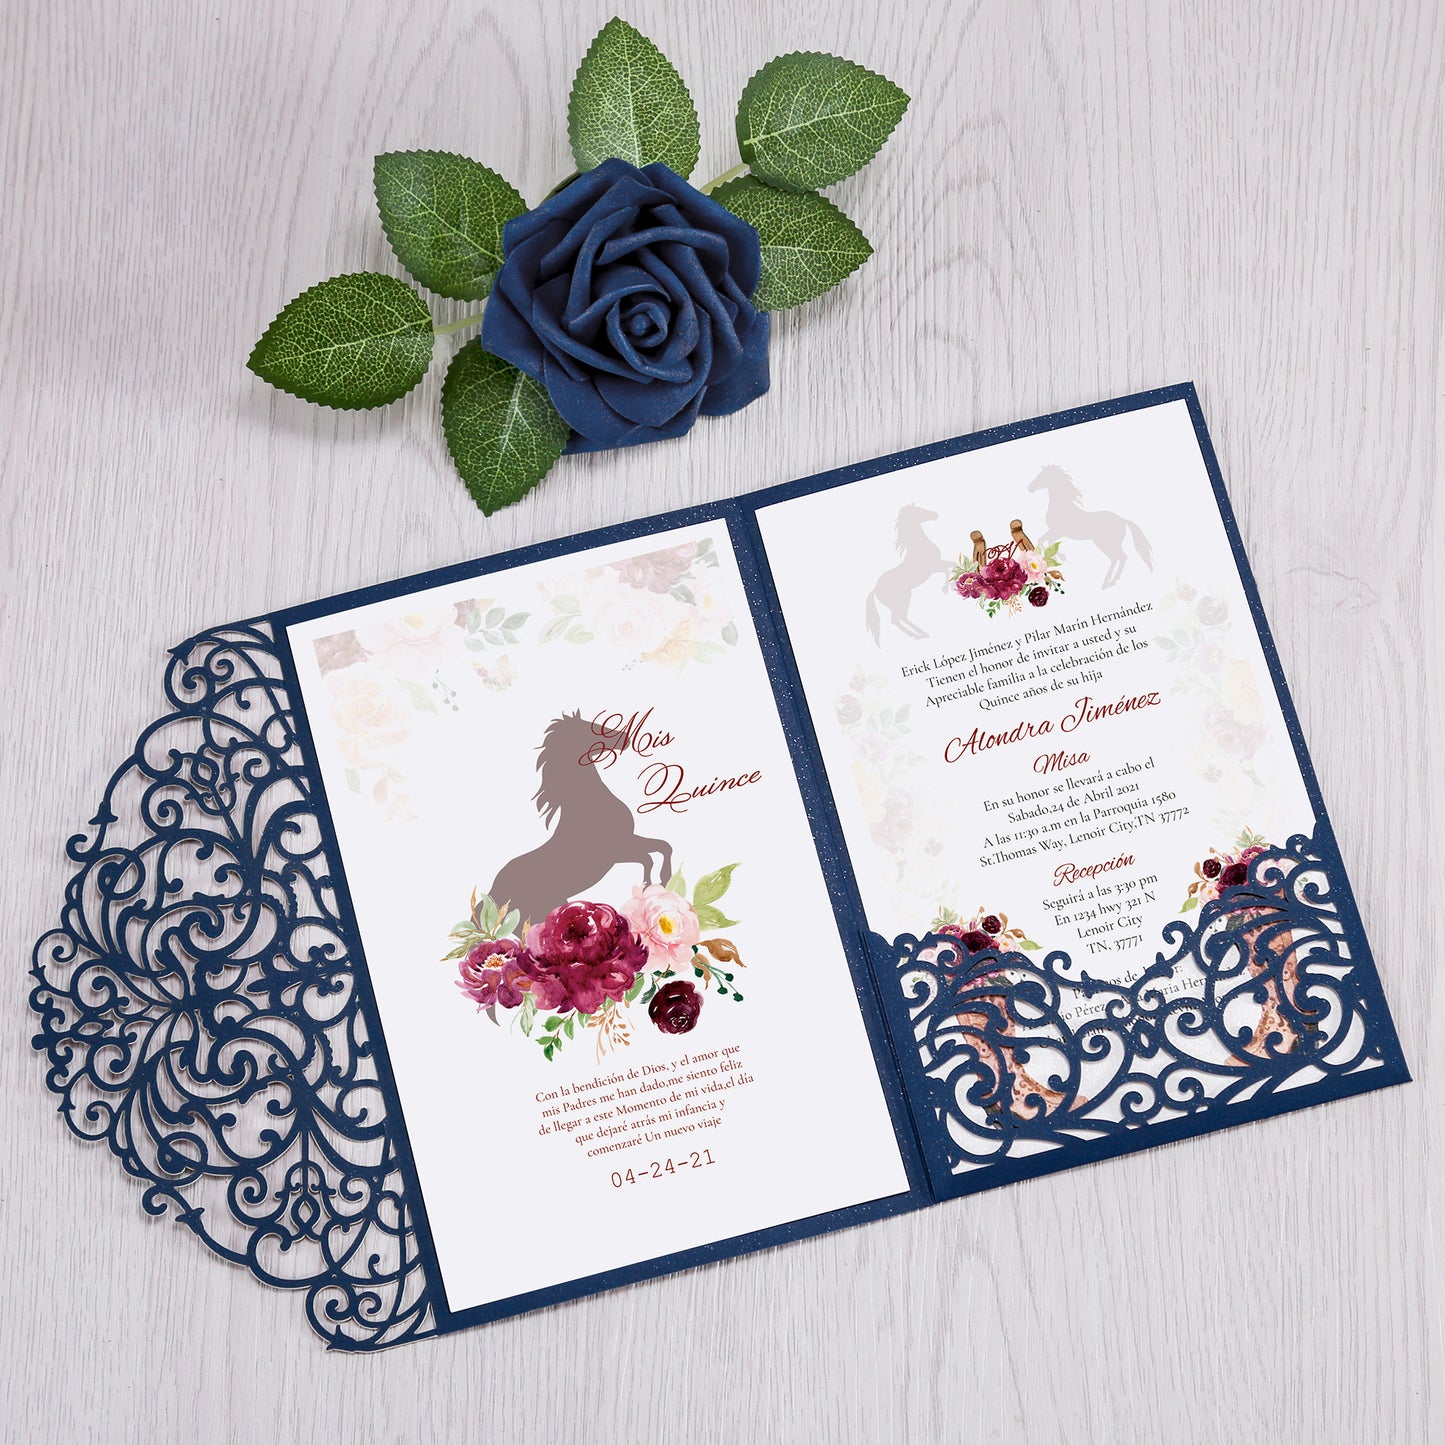 4.7 x7 inch Blue Laser Cut Hollow Rose Quinceanera Invitations Cards with Envelopes for Birthday Sweet 16